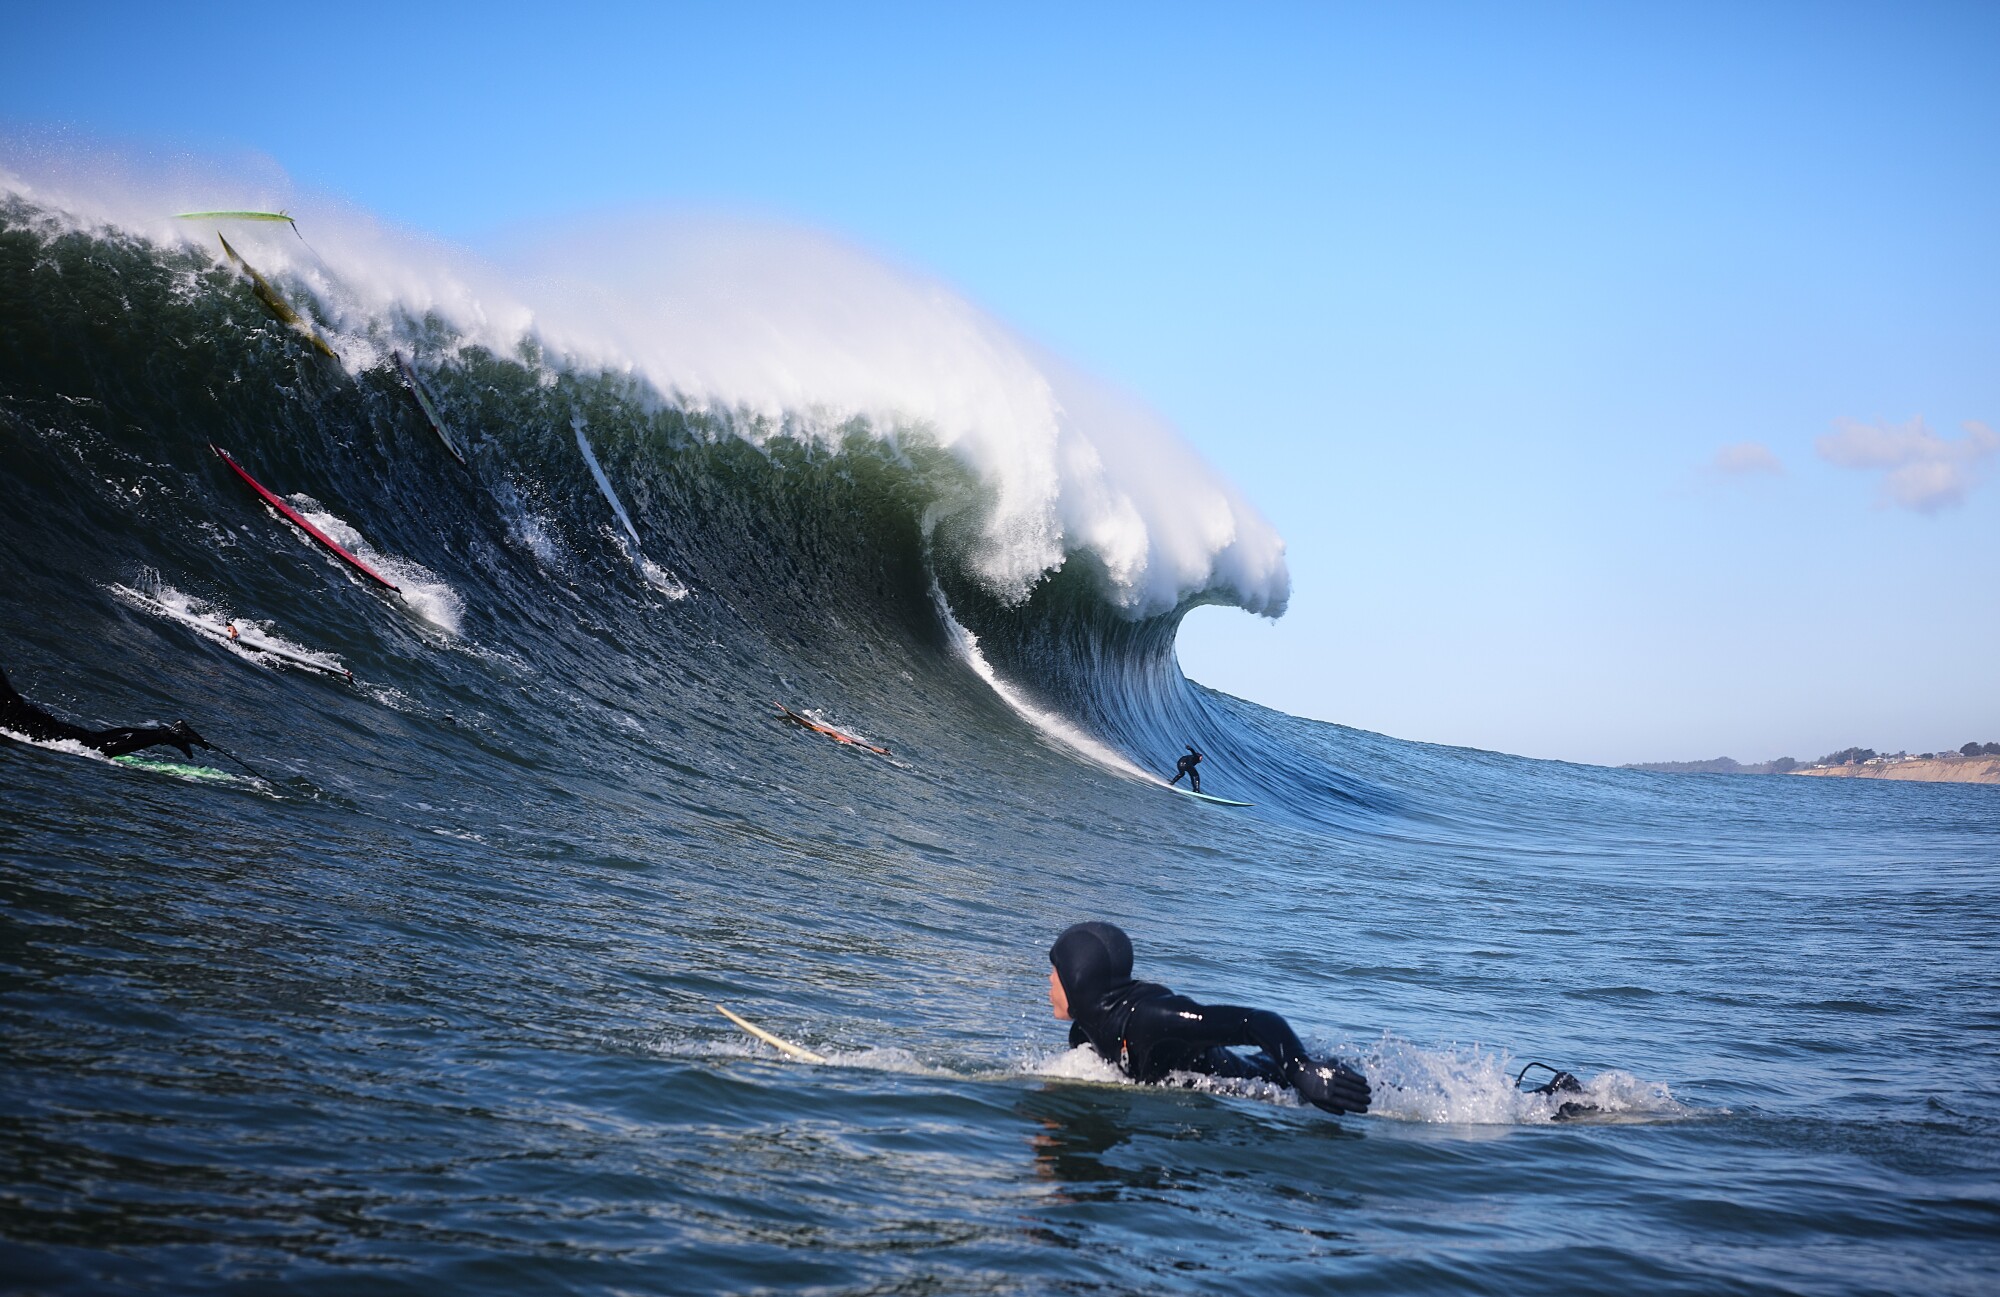 A lineup of surfers on a 20-plus-foot wave